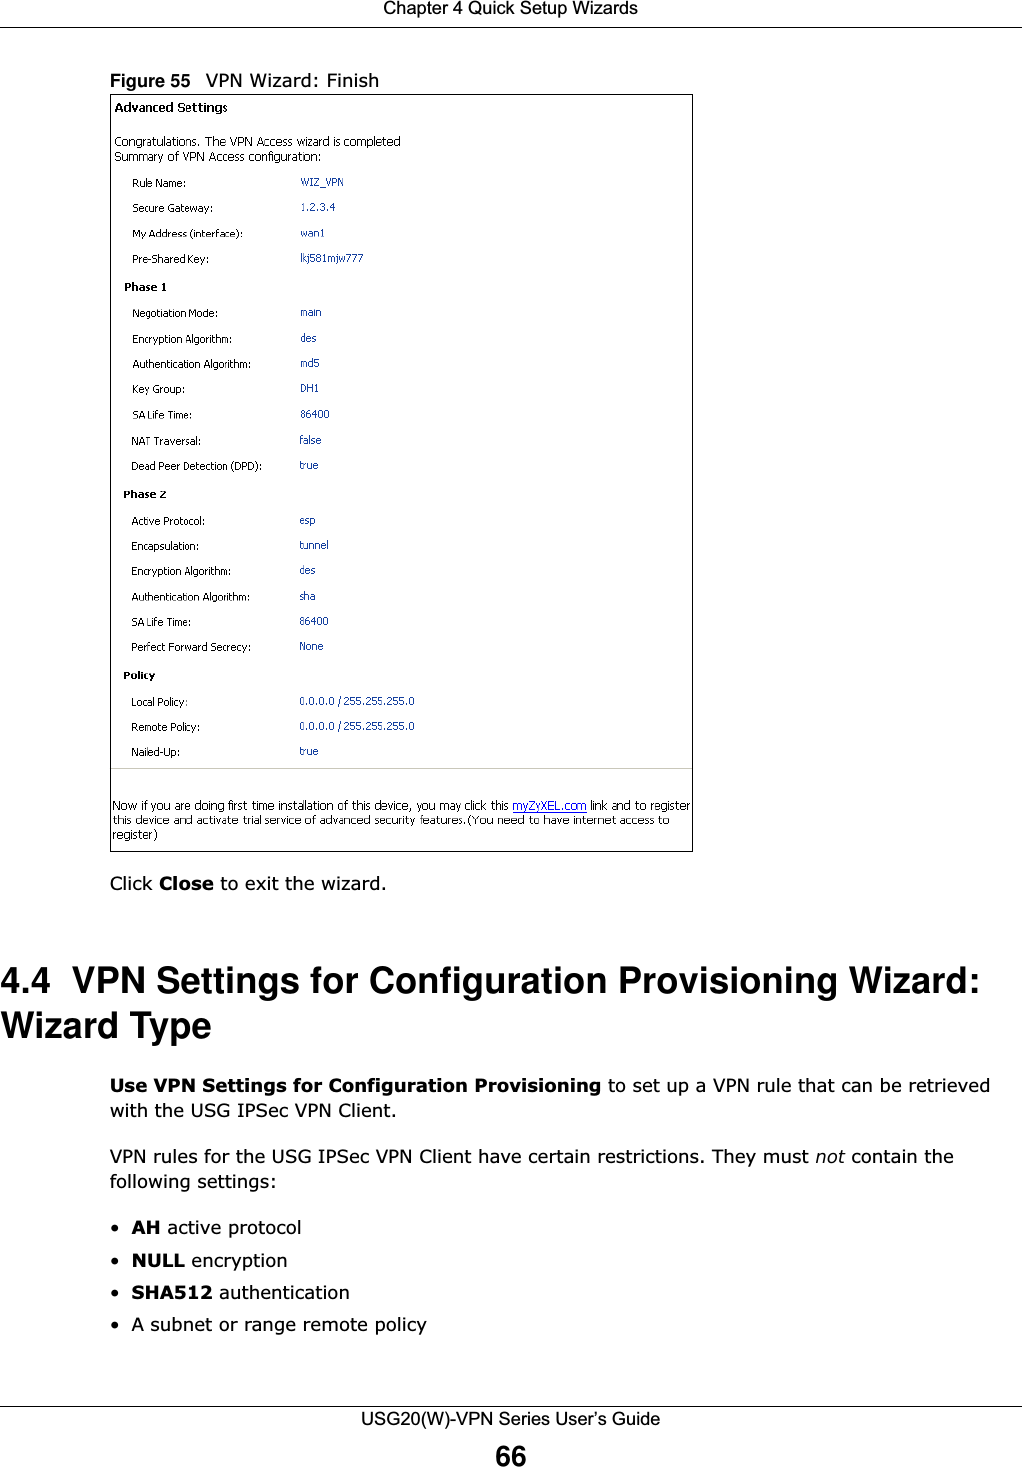 Chapter 4 Quick Setup WizardsUSG20(W)-VPN Series User’s Guide66Figure 55   VPN Wizard: Finish   Click Close to exit the wizard.4.4  VPN Settings for Configuration Provisioning Wizard: Wizard TypeUse VPN Settings for Configuration Provisioning to set up a VPN rule that can be retrieved with the USG IPSec VPN Client.VPN rules for the USG IPSec VPN Client have certain restrictions. They must not contain the following settings:•AH active protocol•NULL encryption•SHA512 authentication• A subnet or range remote policy